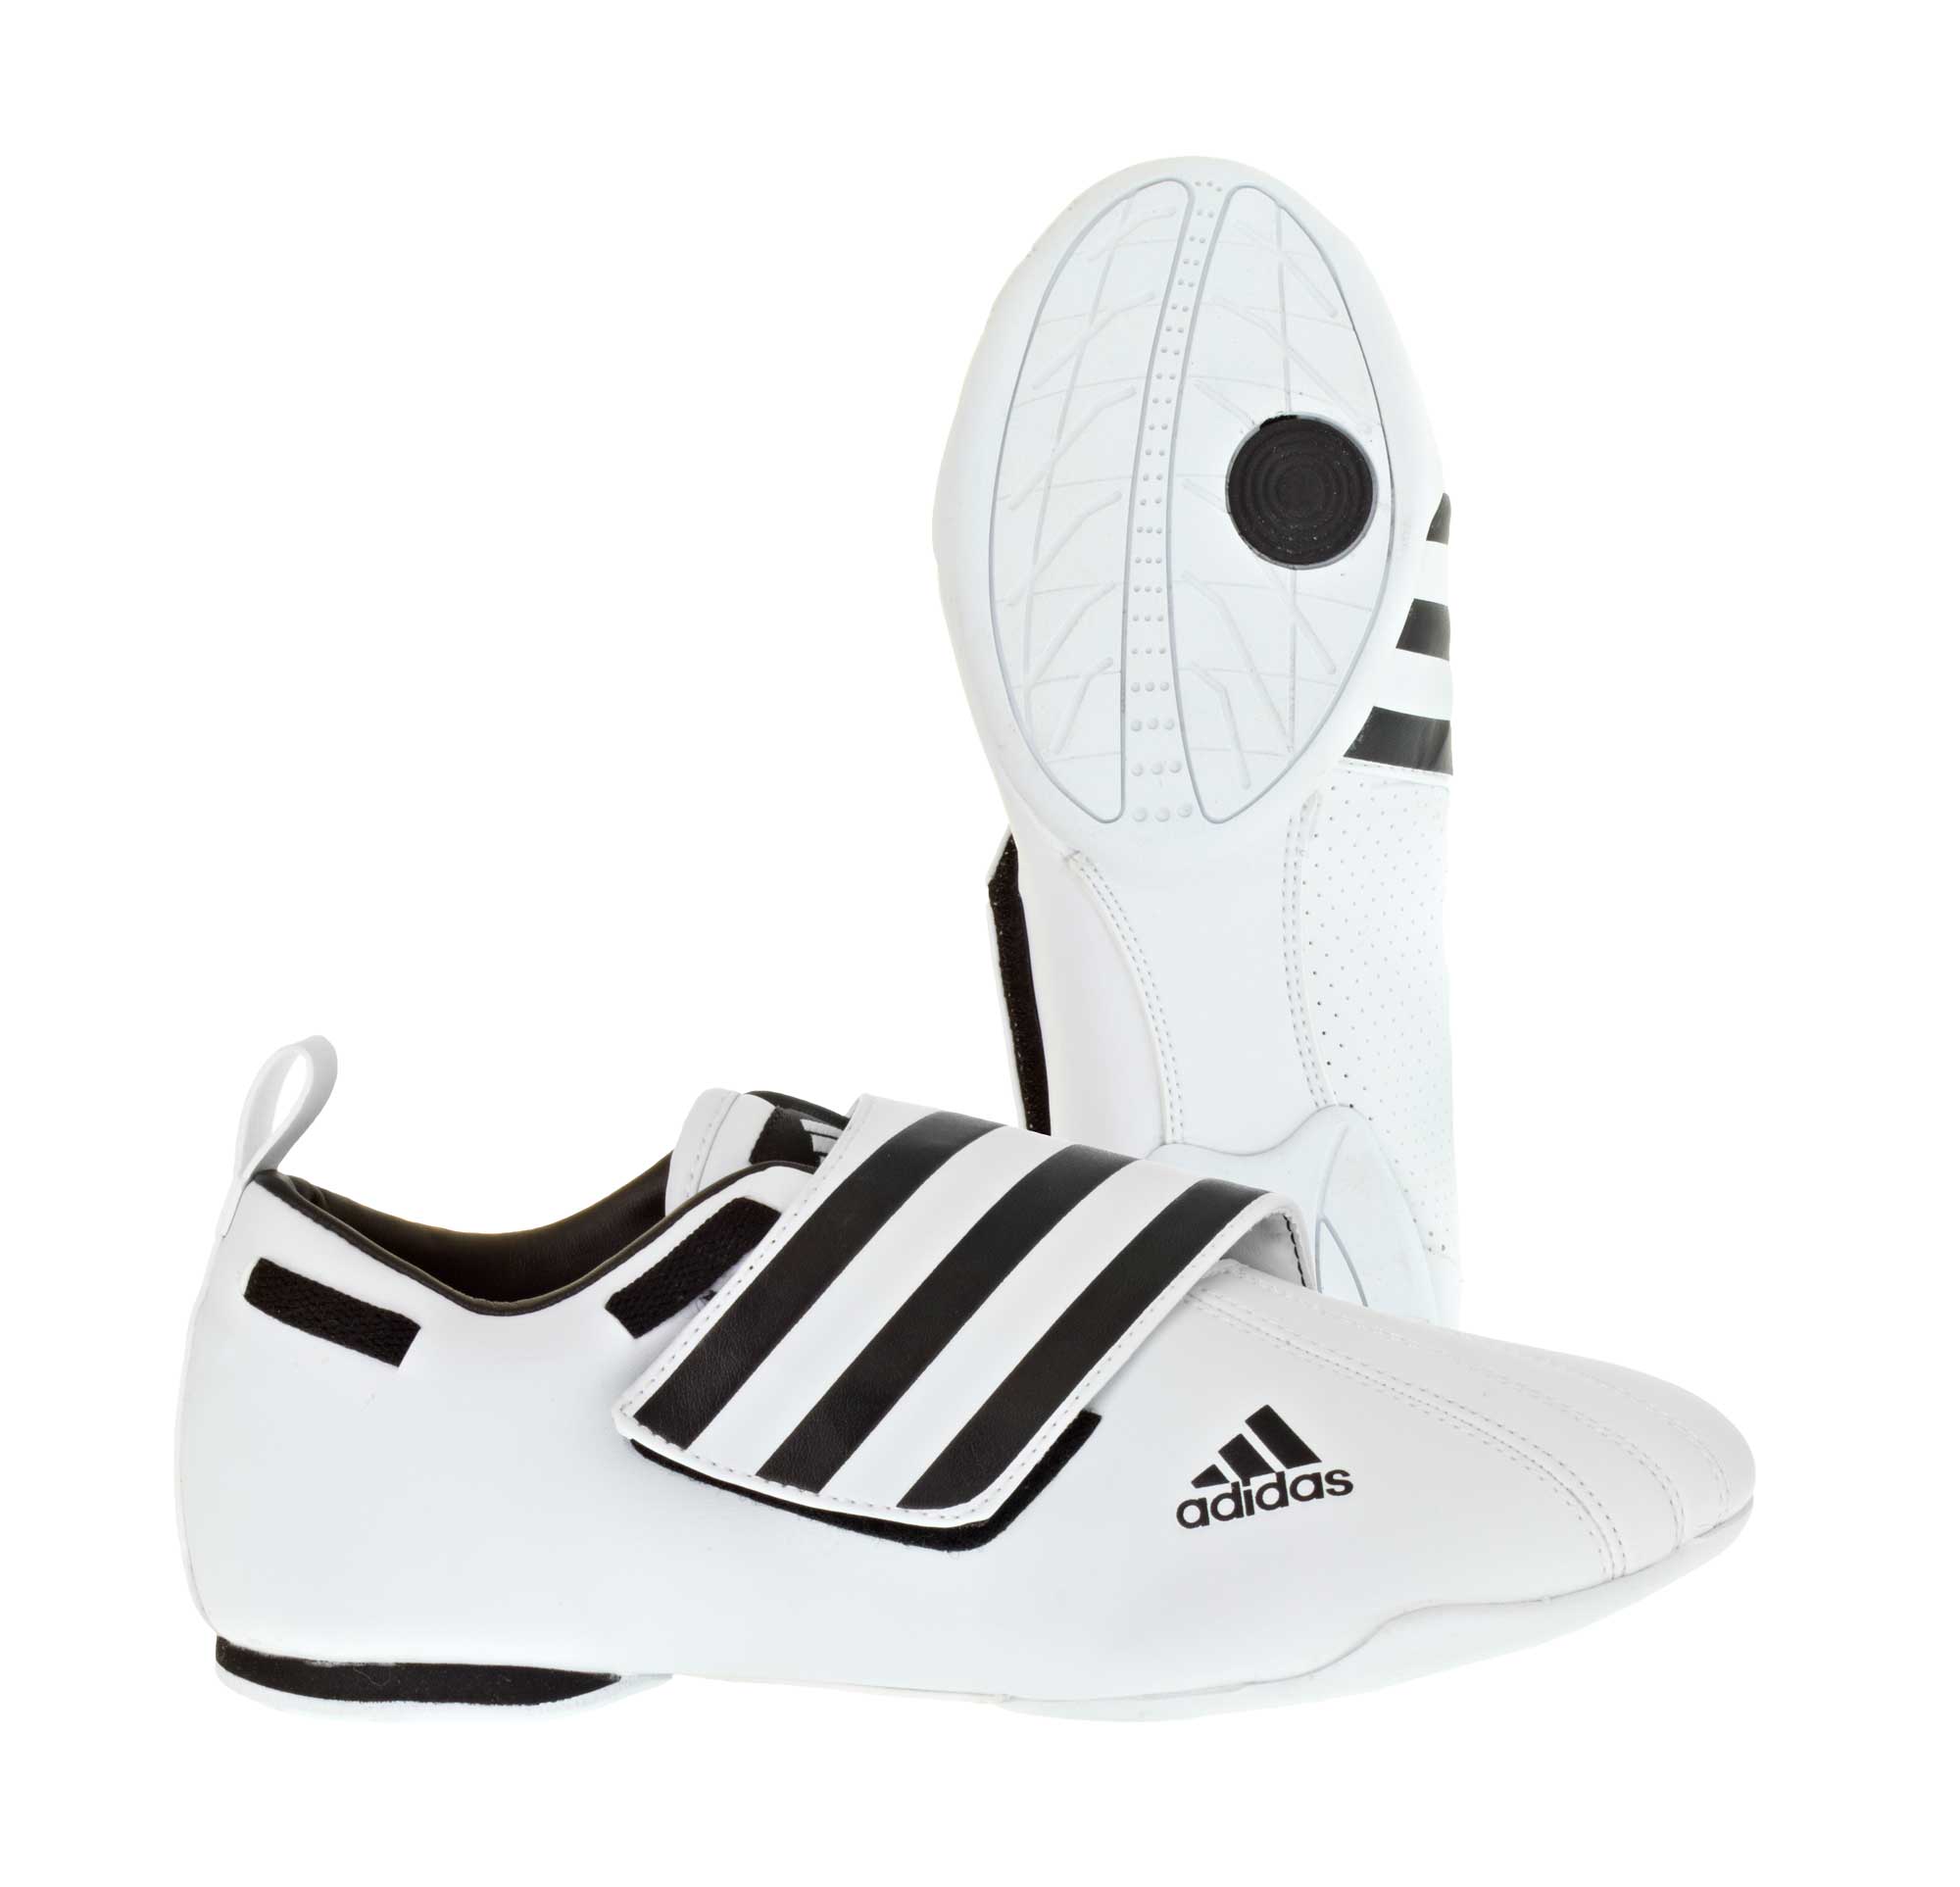 adidas TKD sneakers Dyna white